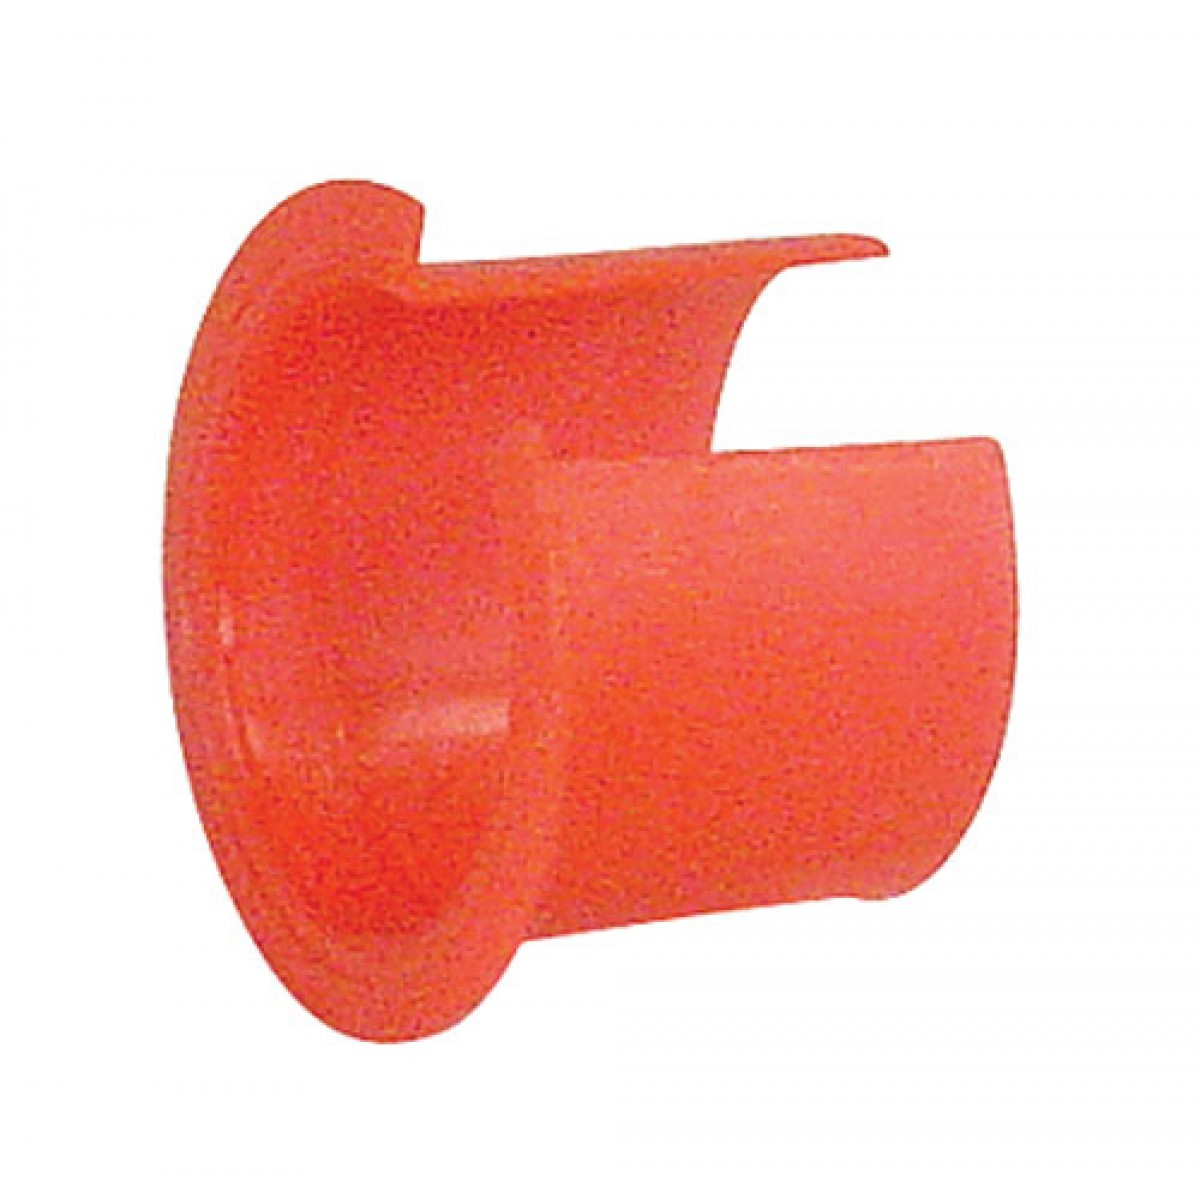 5 Pcs, 1 In. Red Thermo Plastic Anti Short Insulating Bushing, Plastic for Use With: 3-1, 2-1, 2-1/ 0, 1-300Mcm, 1-350Mcm, 1-400Mcm, 1-450Mcm, 1-500Mcm - image 1 of 1